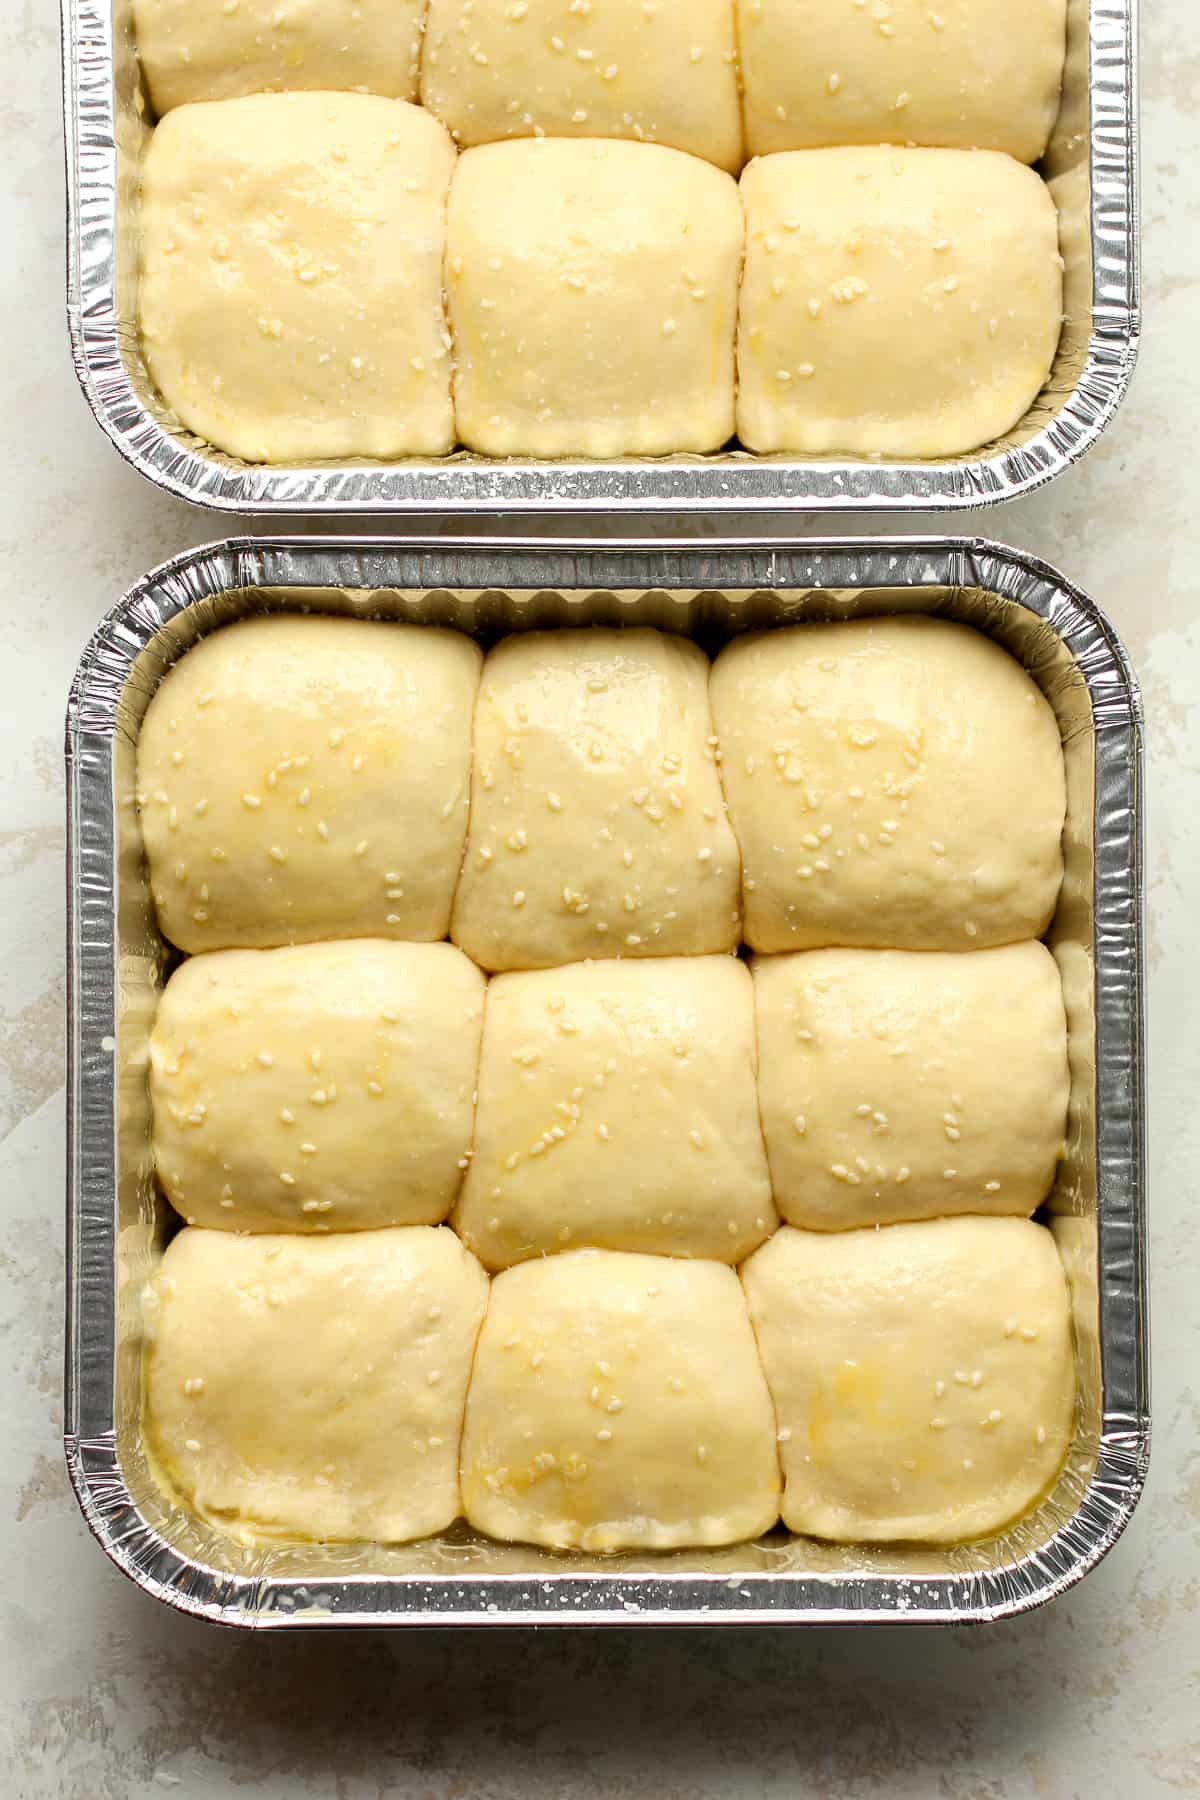 Overhead view of the dinner rolls before baking.